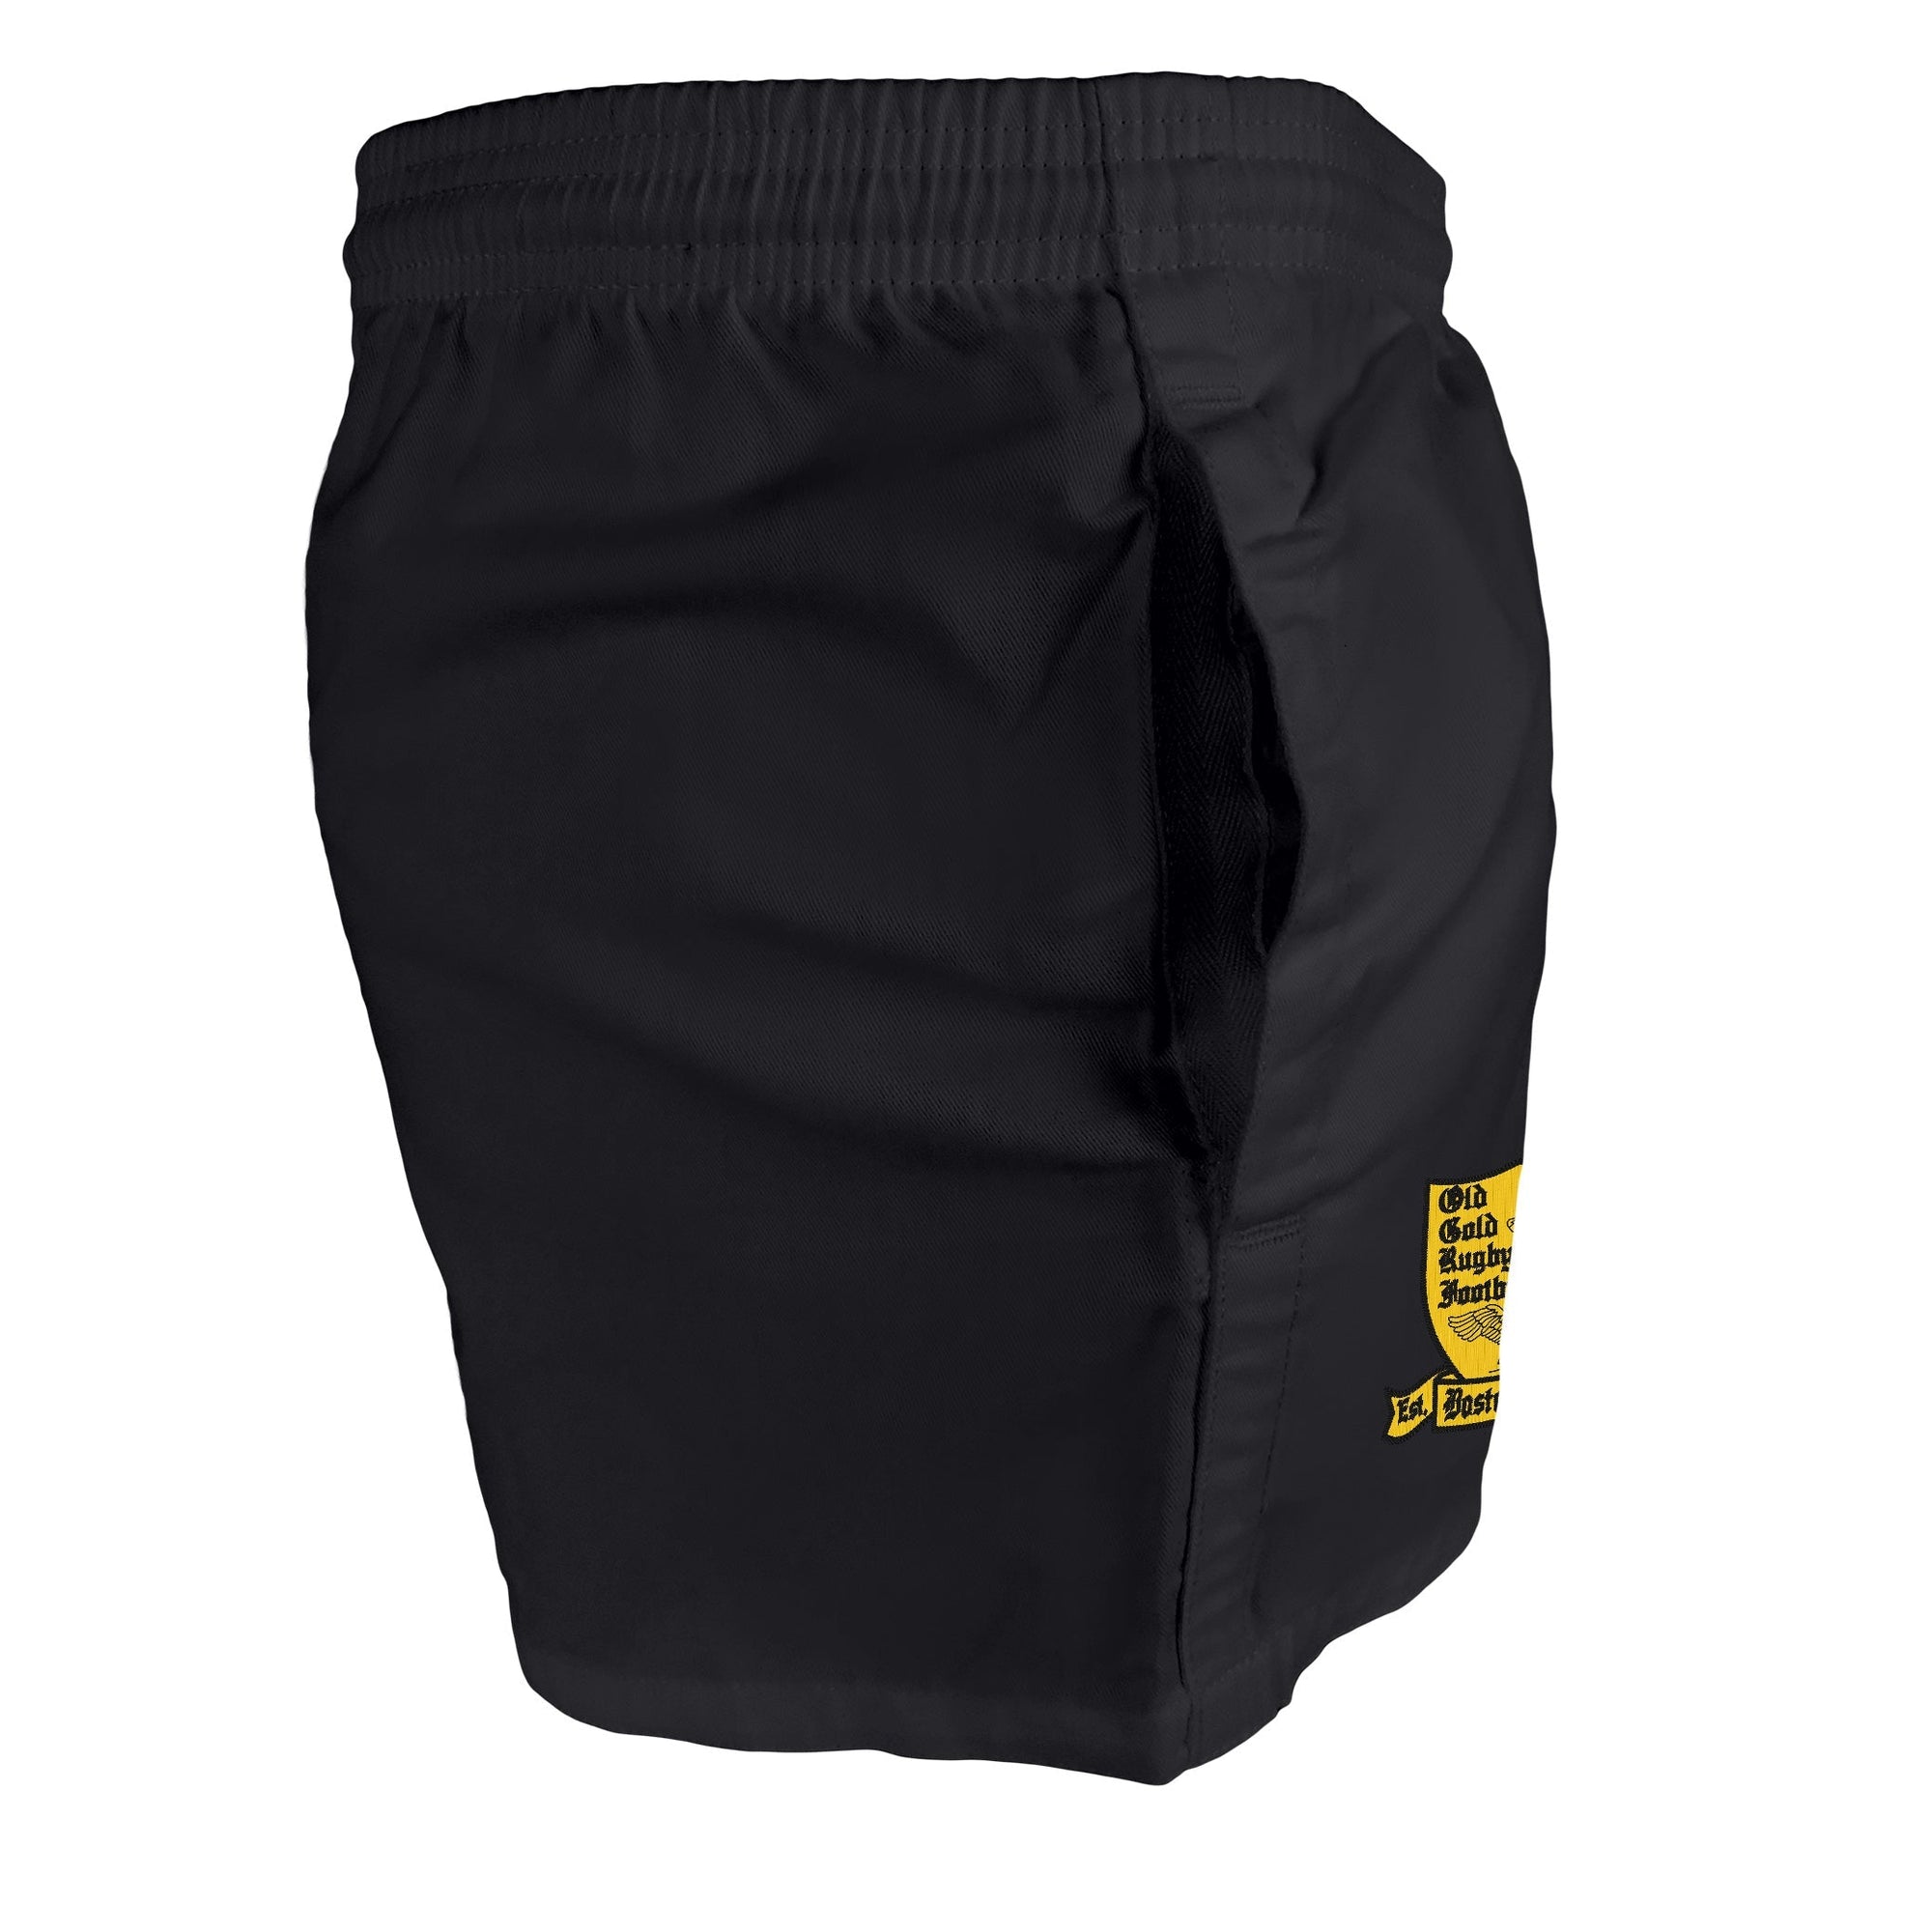 Rugby Imports Old Gold RFC Gilbert Kiwi Pro Short